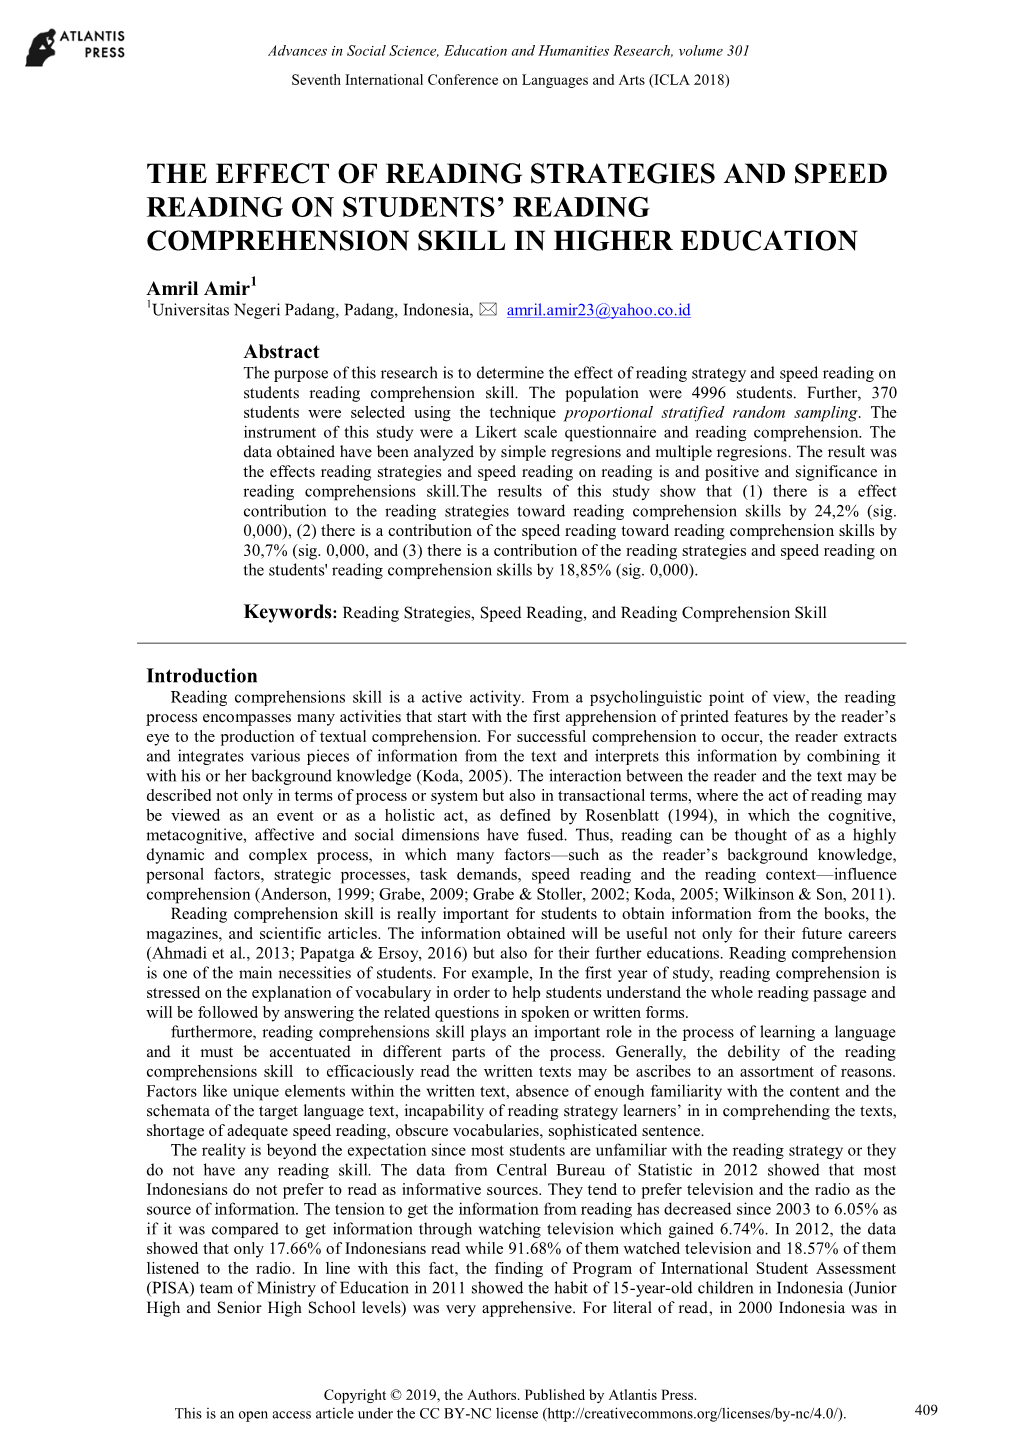 The Effect of Reading Strategies and Speed Reading on Students’ Reading Comprehension Skill in Higher Education